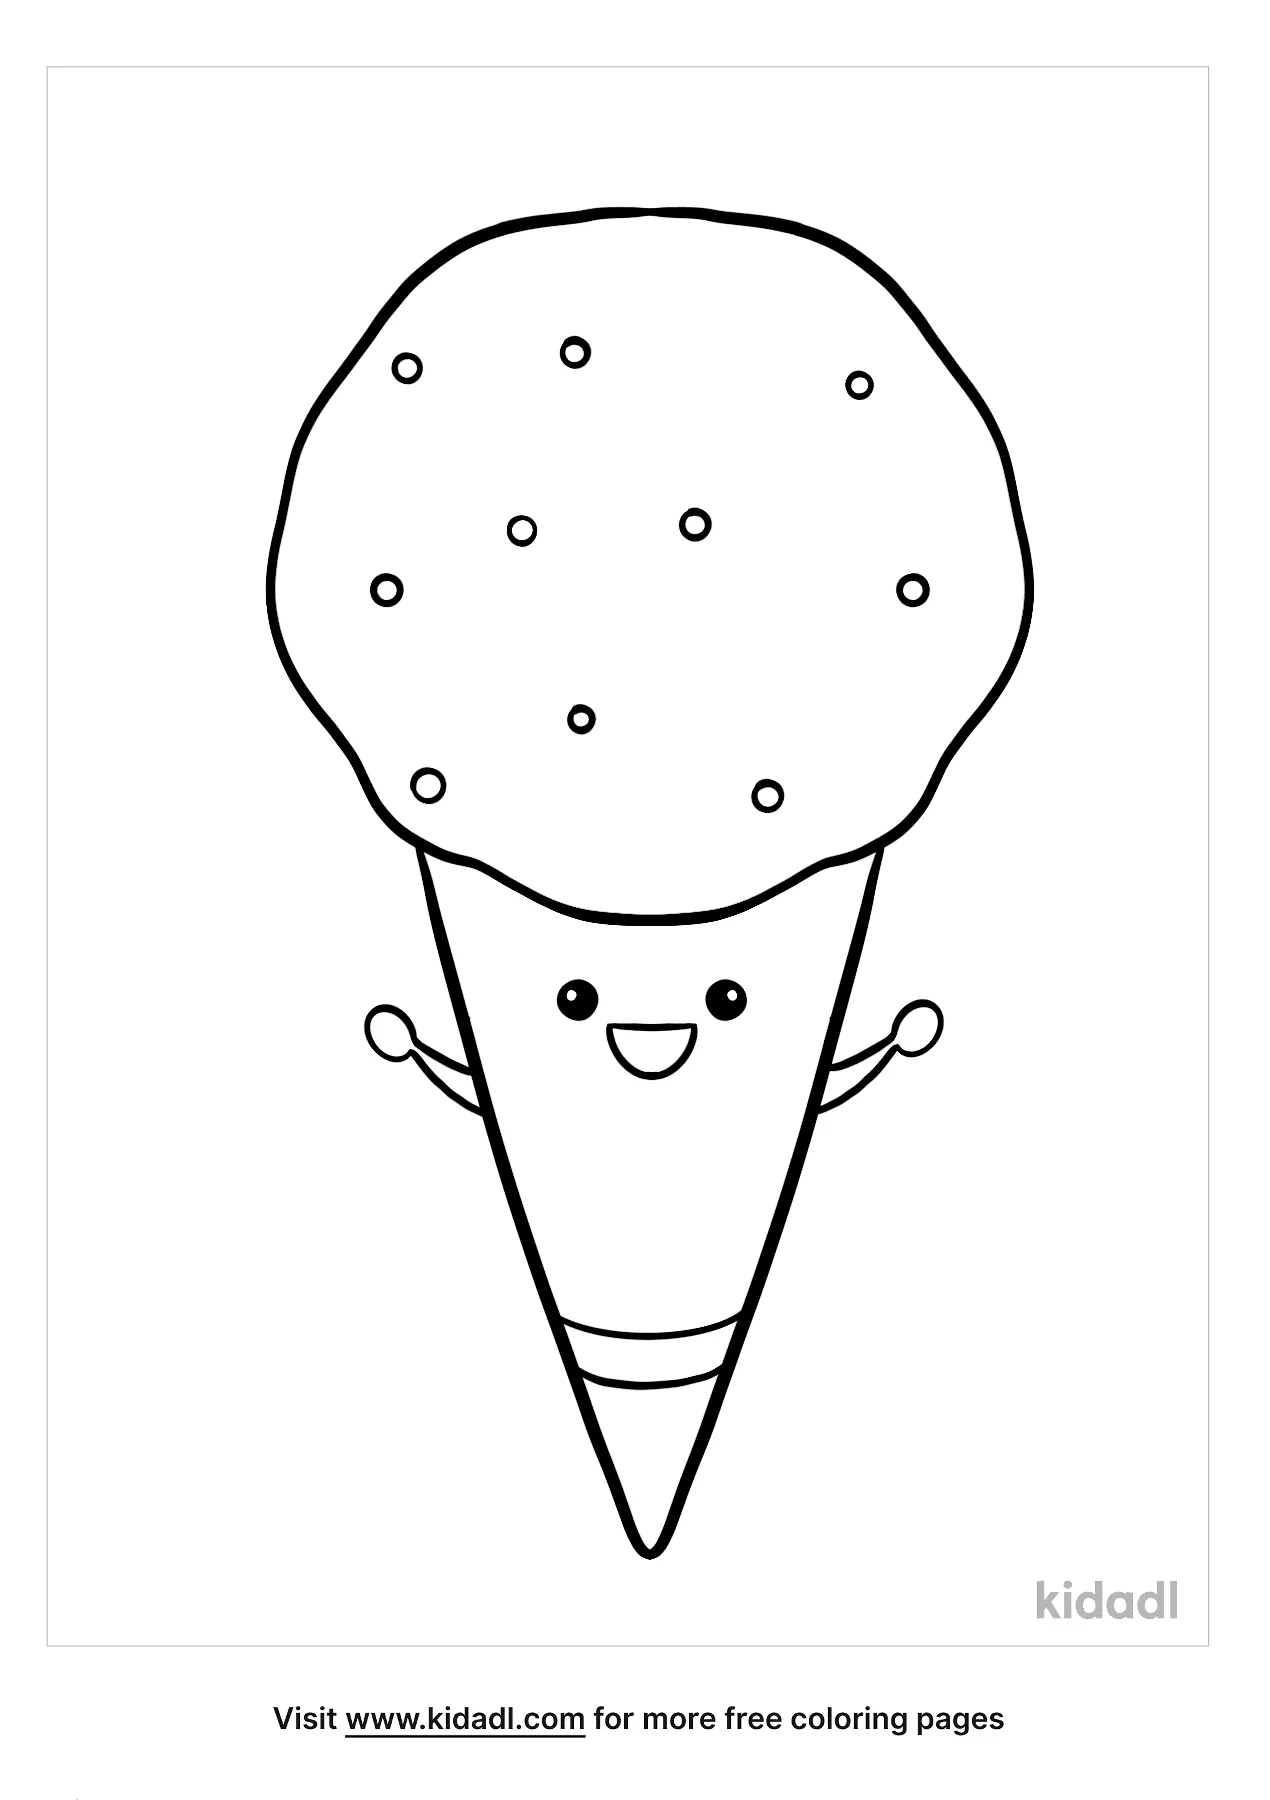 Snow Cone Coloring Pages Free Food Coloring Pages Kidadl